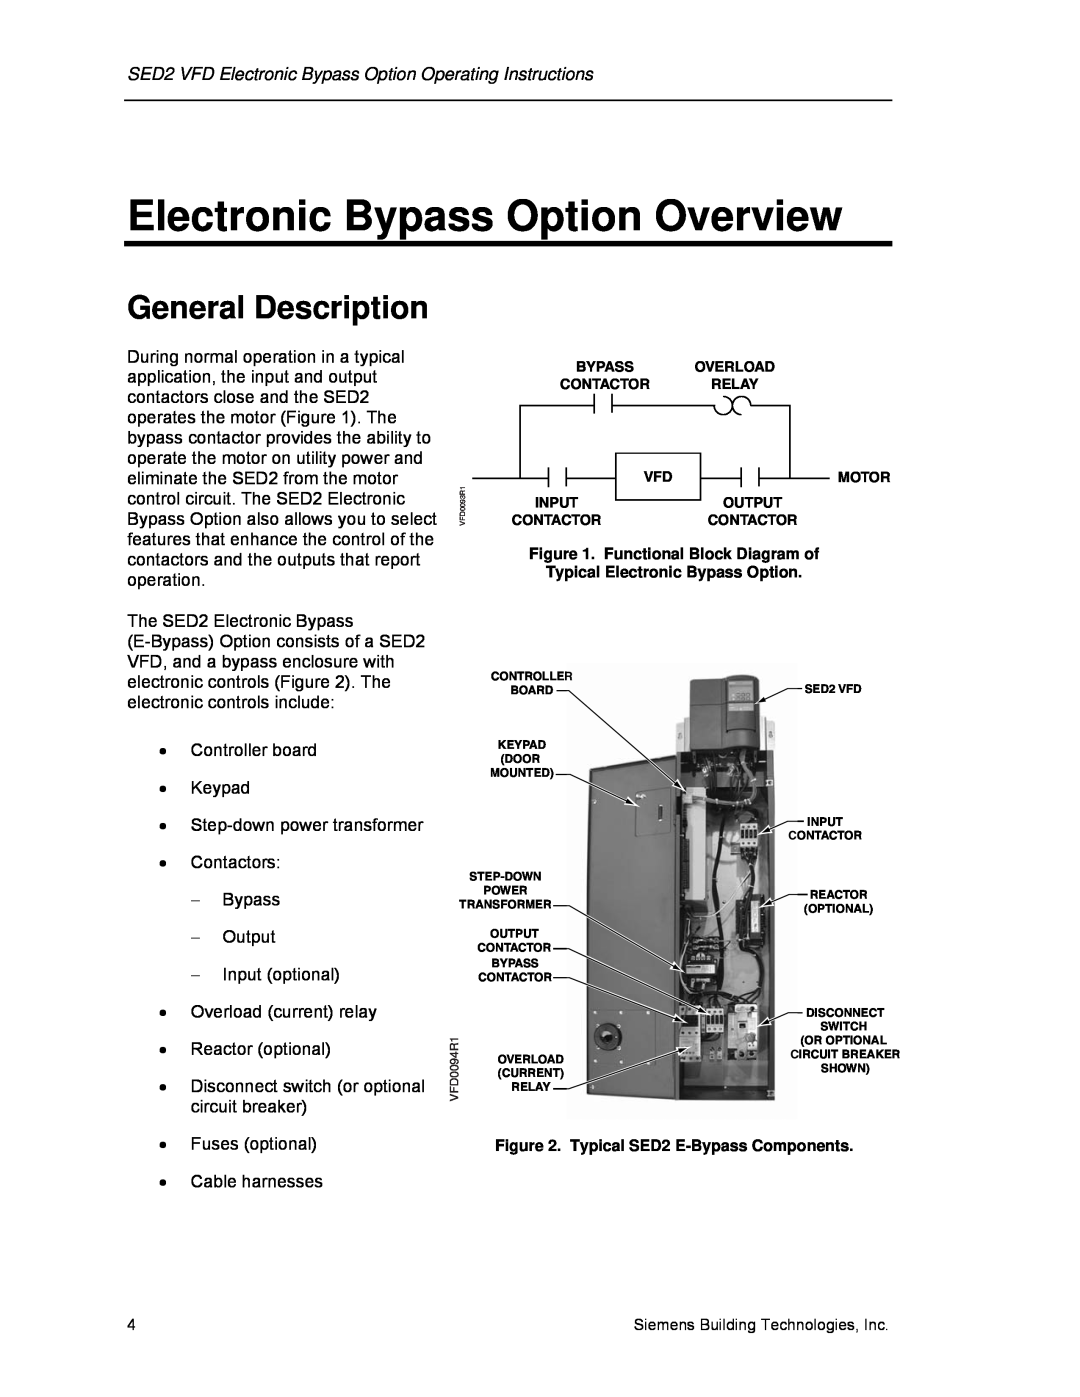 Siemens 125-3208 operating instructions Electronic Bypass Option Overview, General Description 